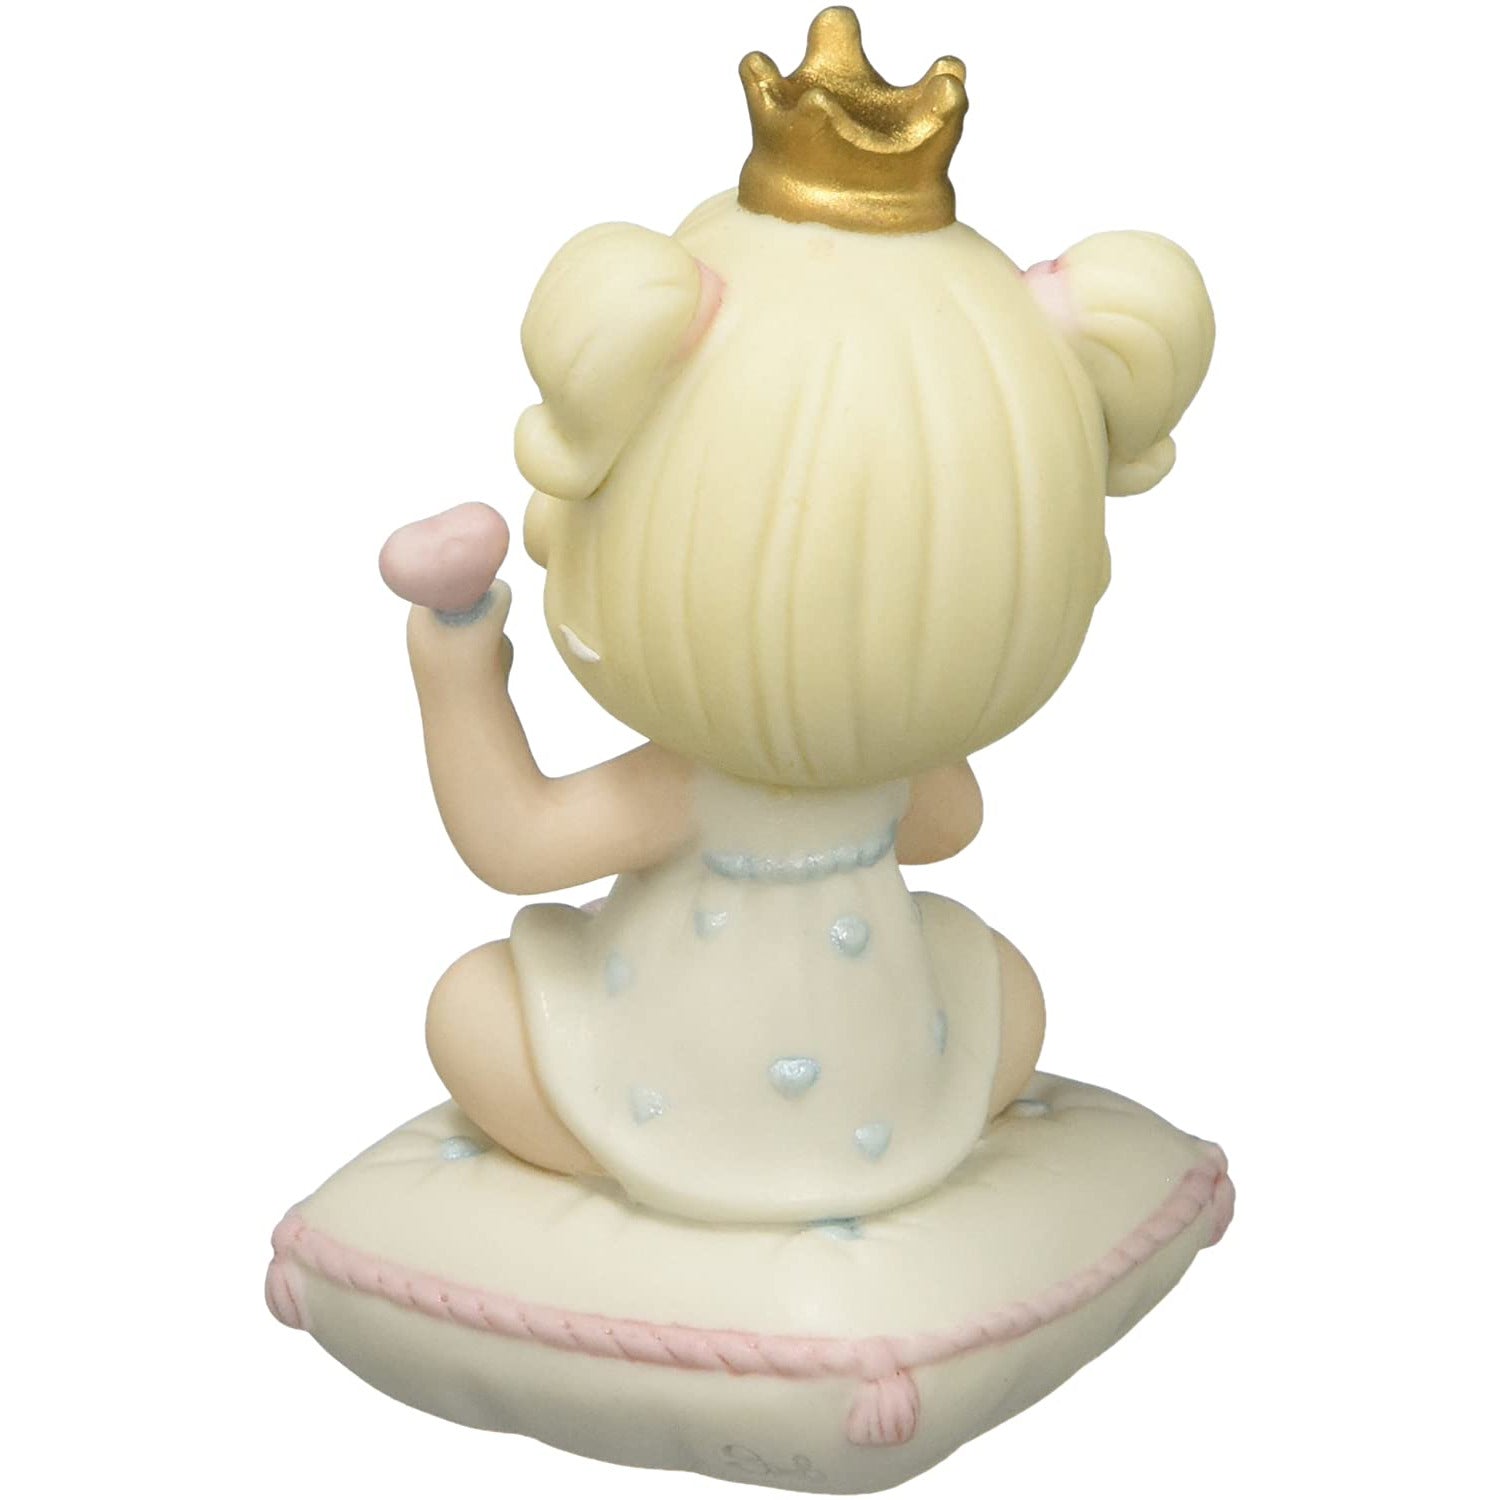 Precious Moments Baby Gifts Lil' Princess Bisque Porcelain Figurine